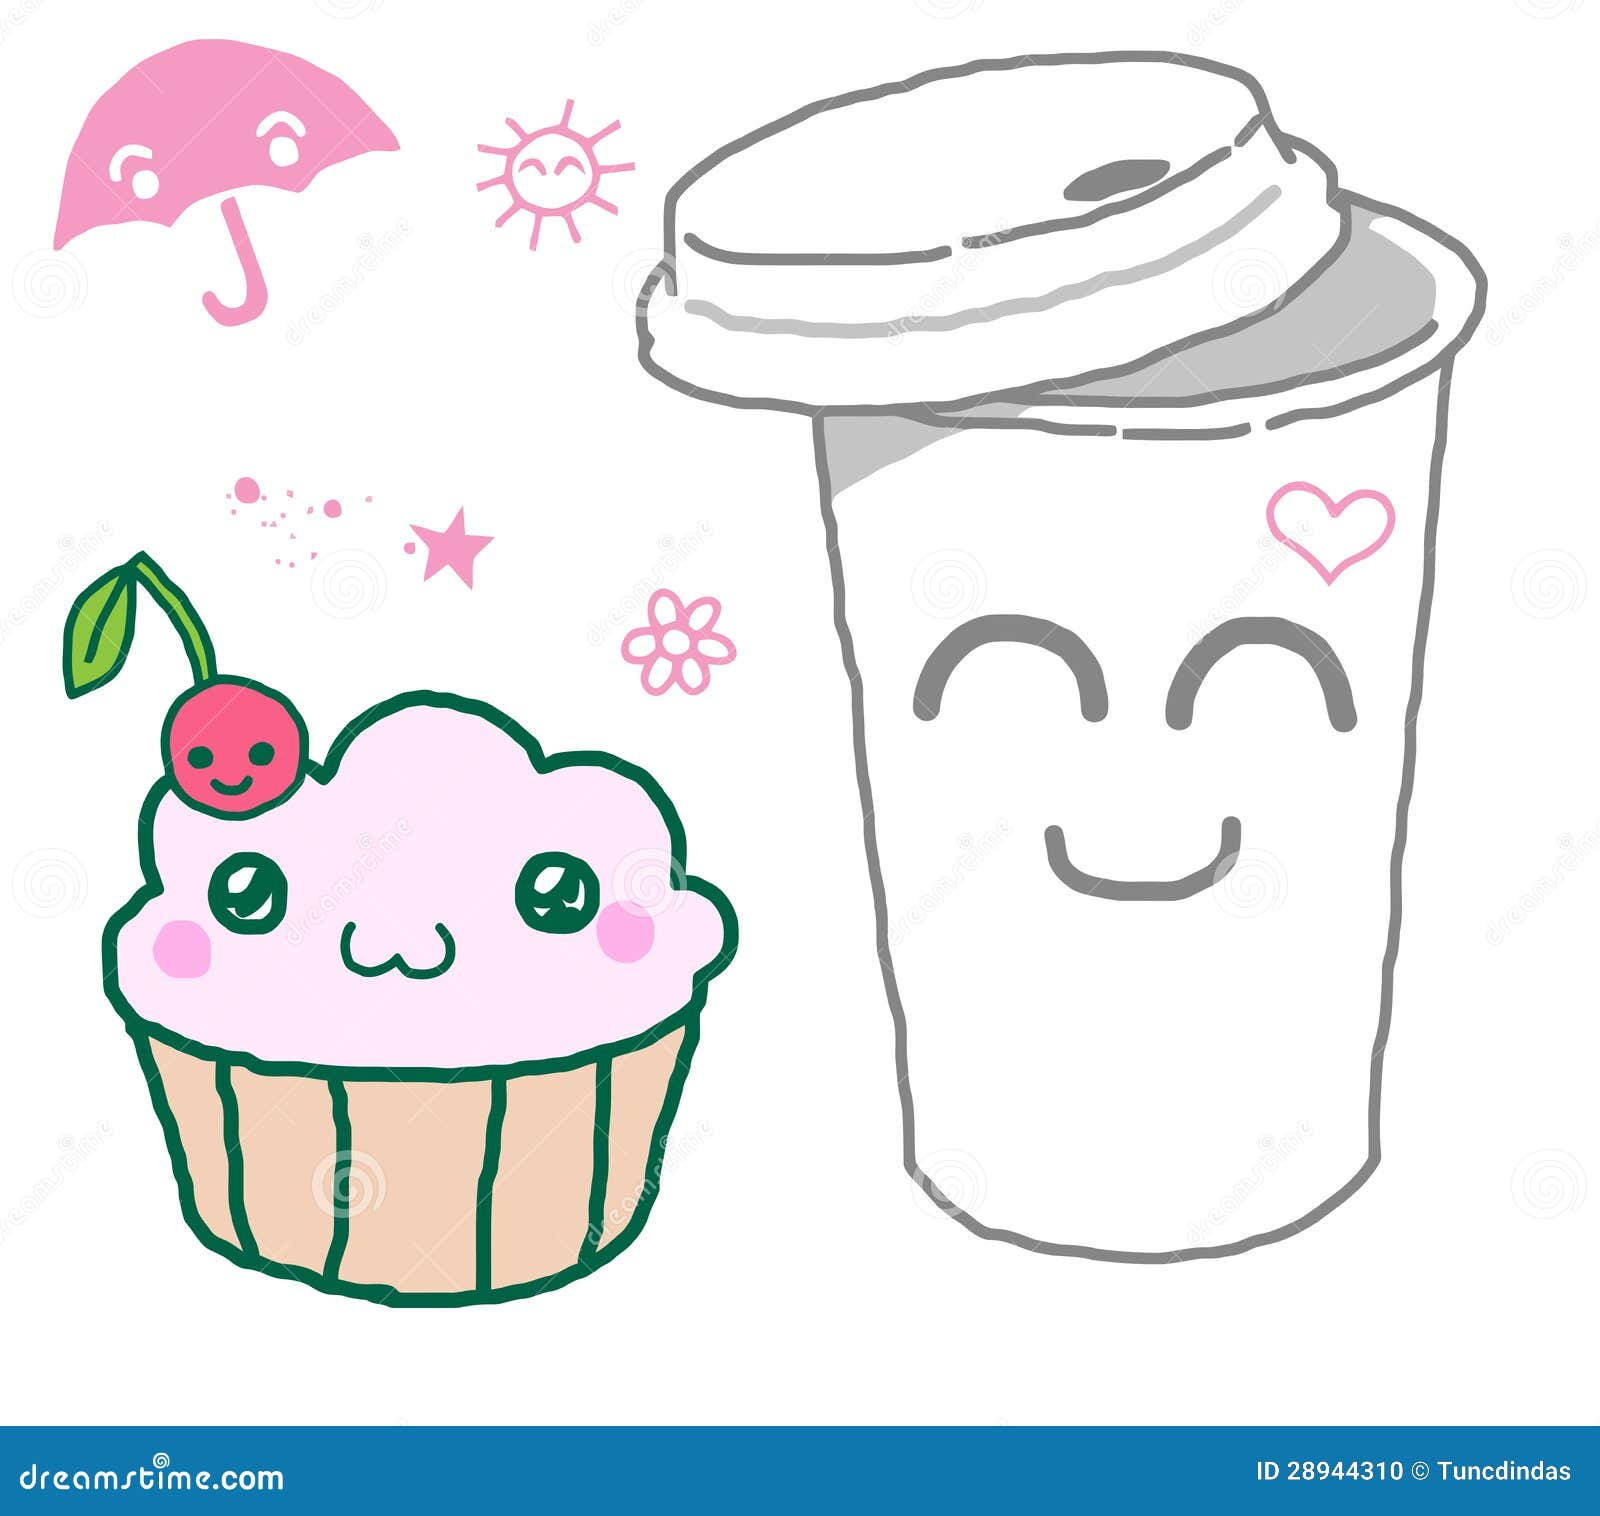 clipart muffins and coffee - photo #35